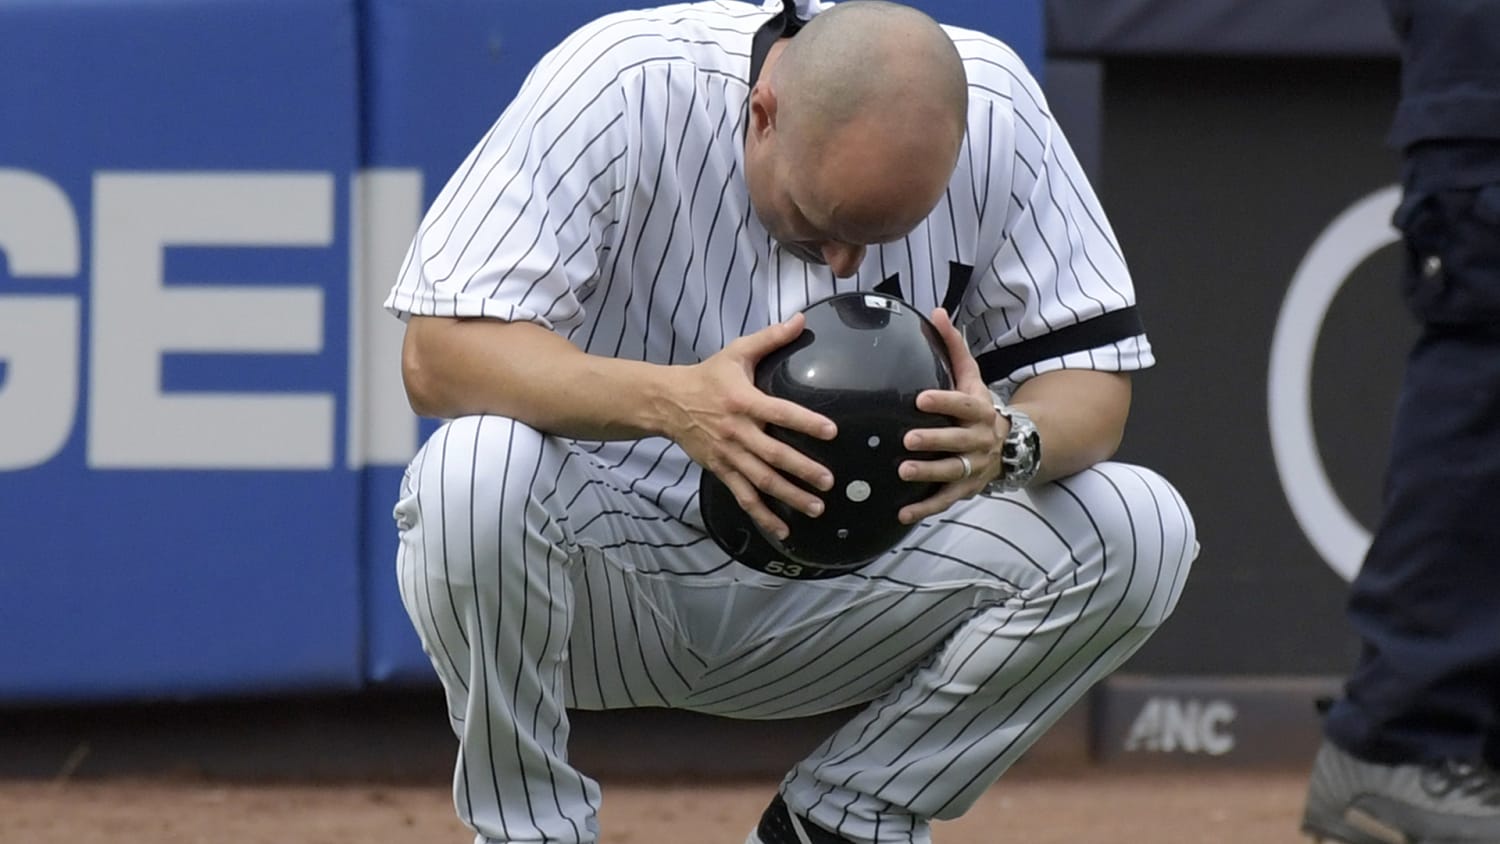 Girl's recovery from Yankees foul ball is 'a miracle,' dad says